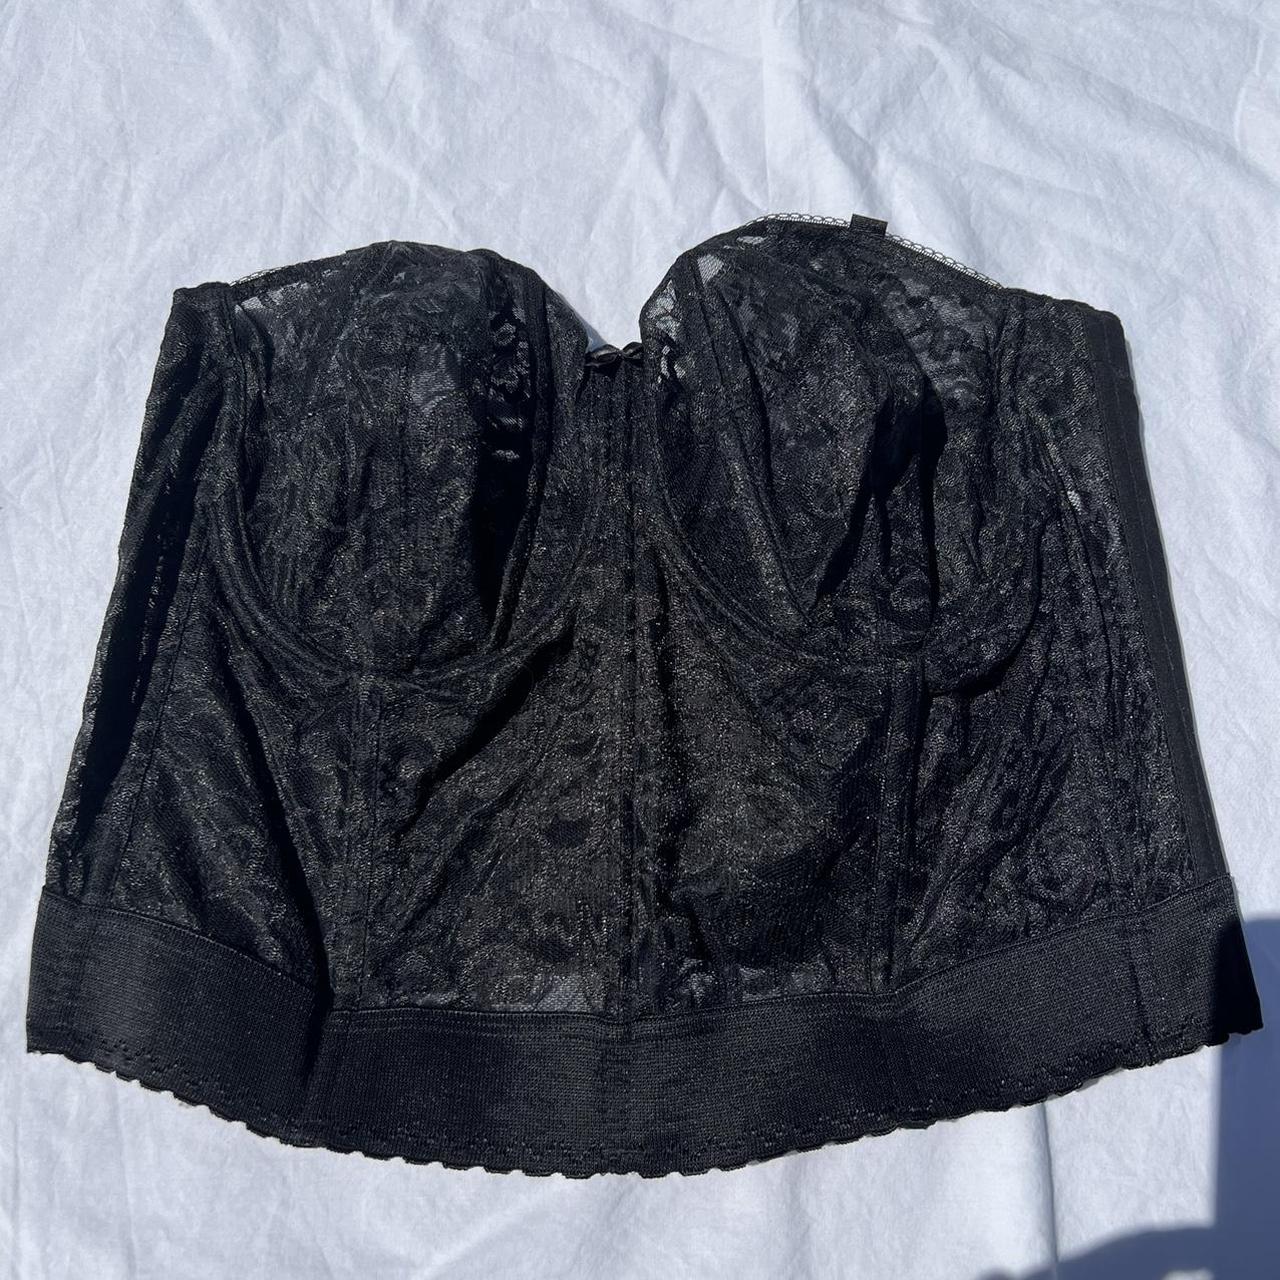 Product Image 1 - stunning black lace bustier from